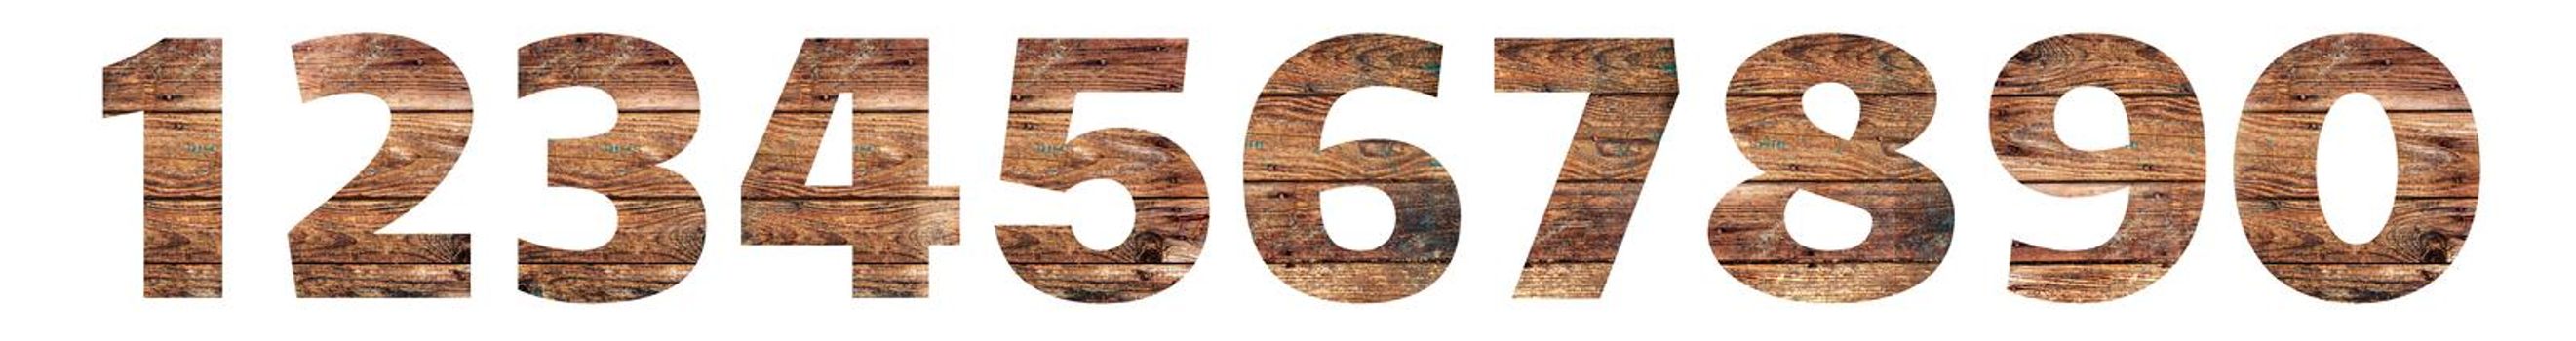 Old Wooden numbers. 1 2 3 4 5 6 7 8 9 0. Isolated on white background. With clipping path